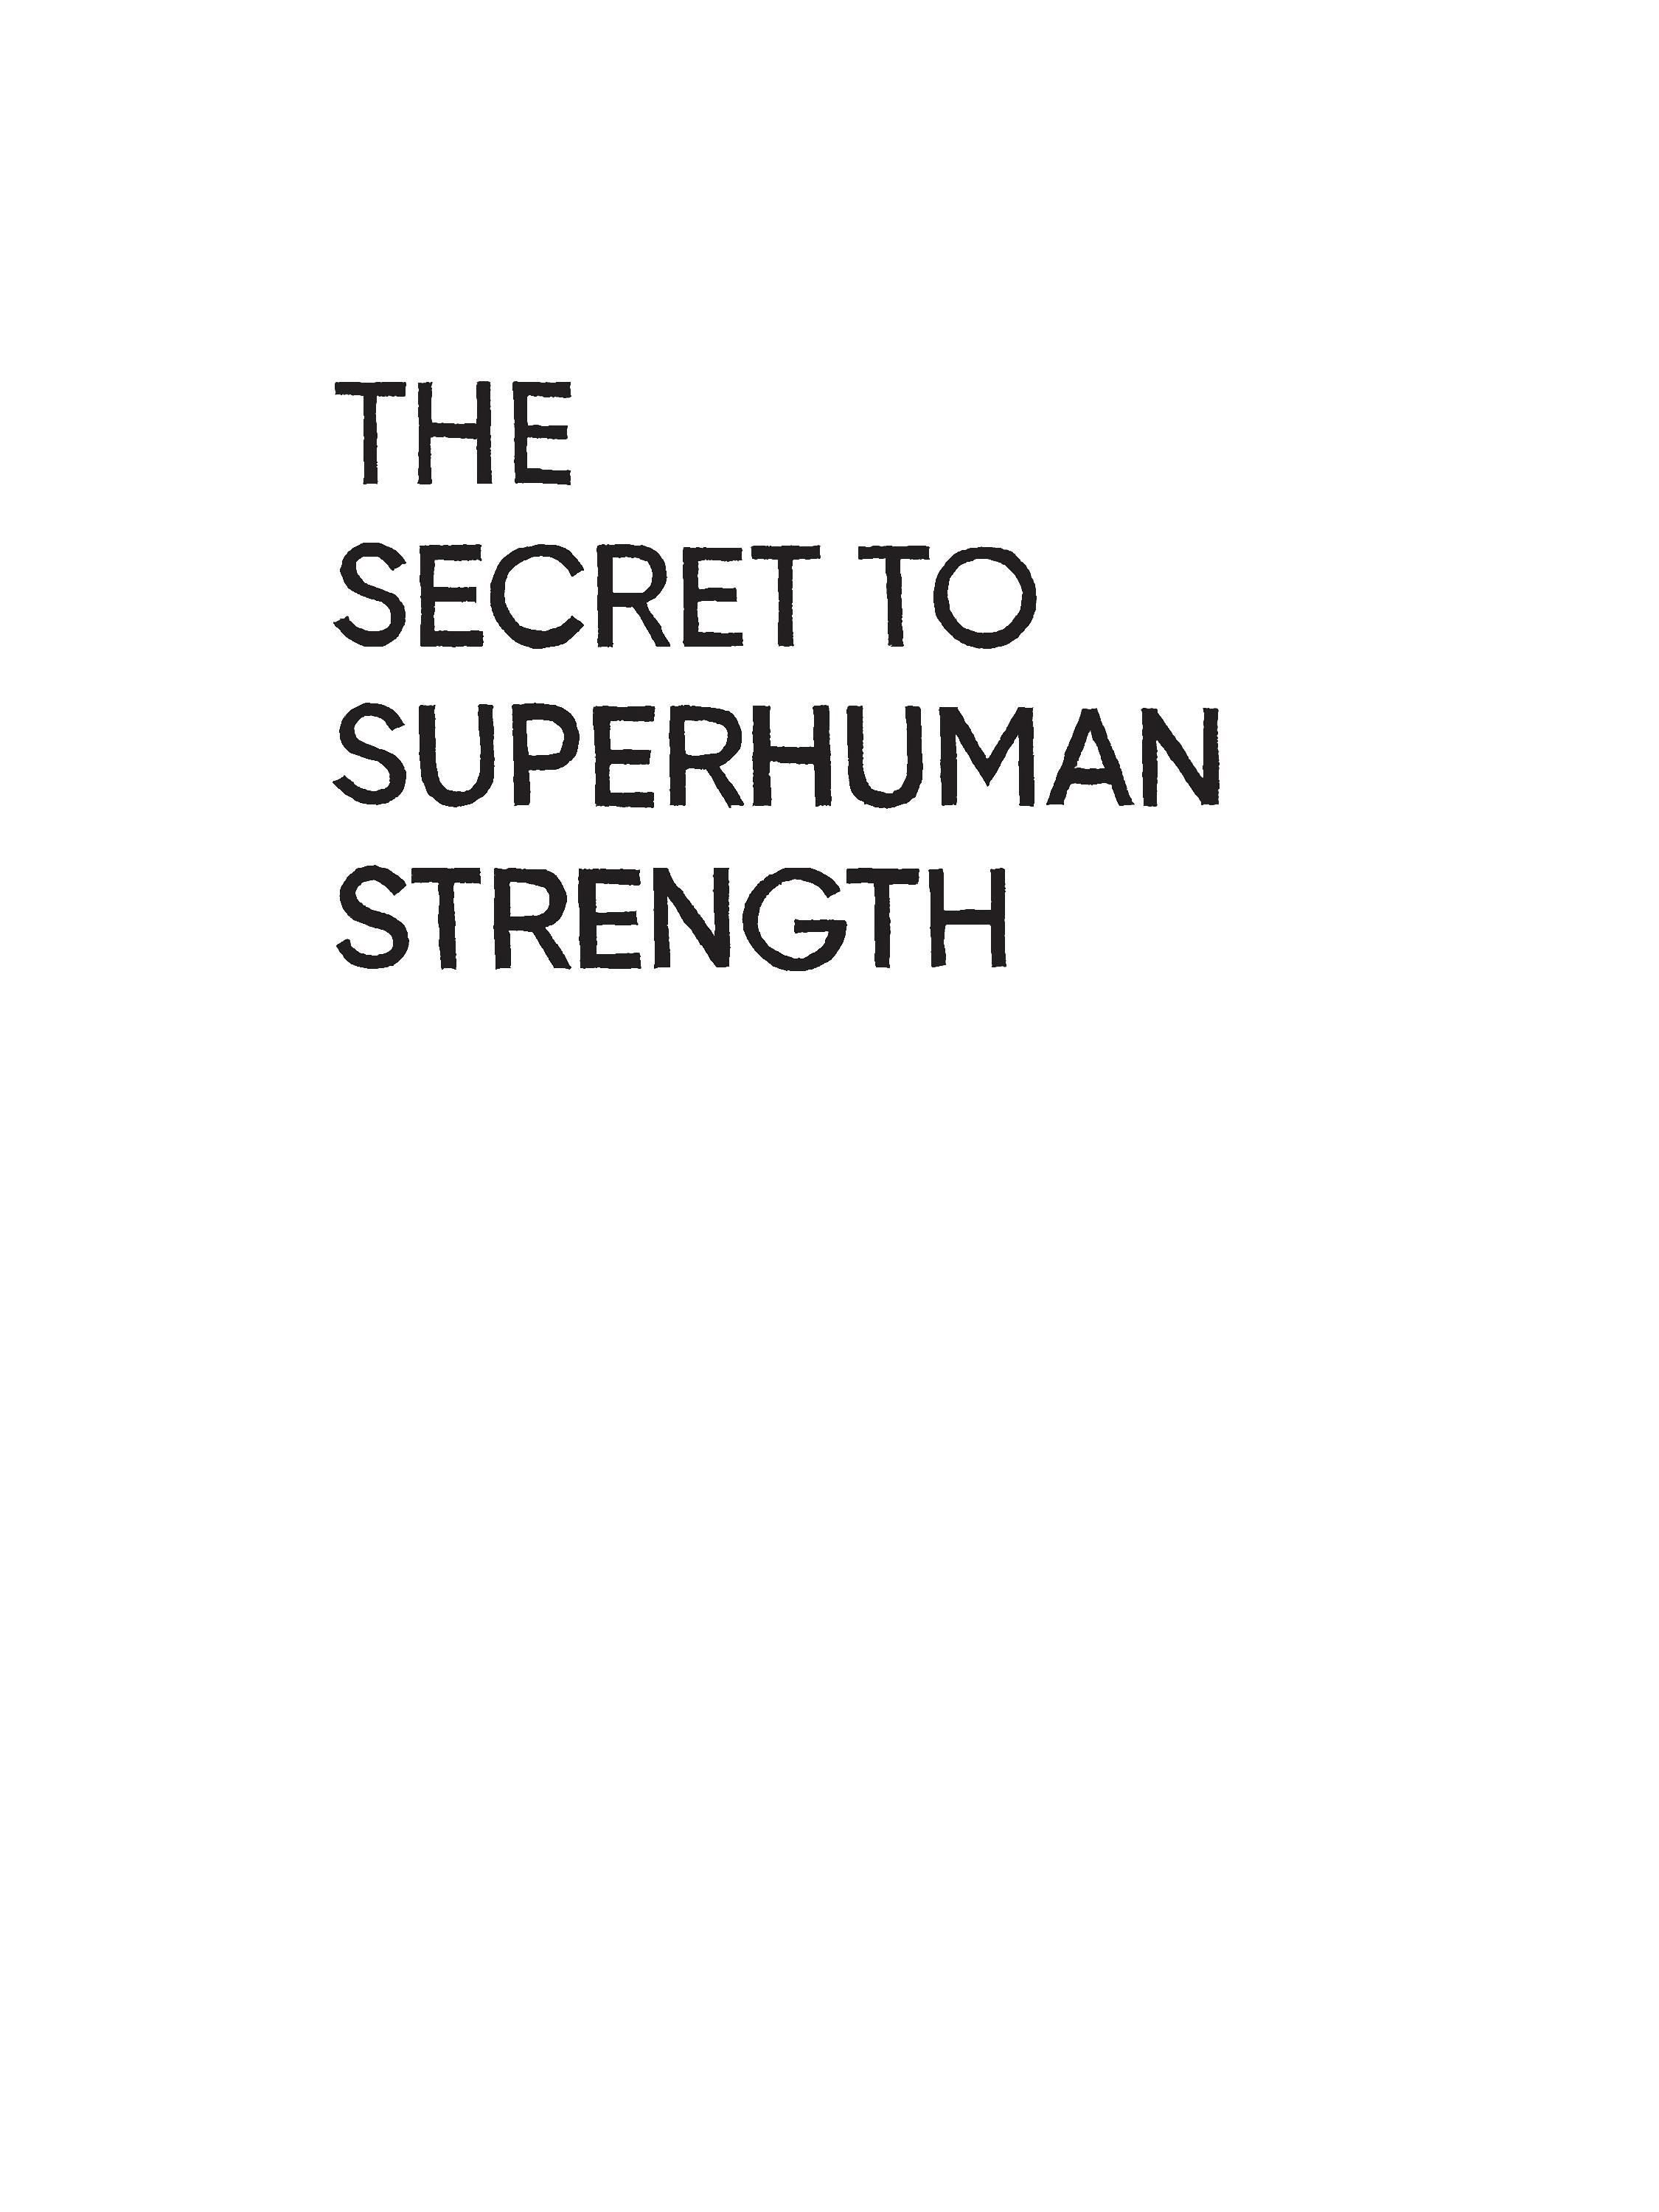 Read online The Secret to Superhuman Strength comic -  Issue # TPB (Part 1) - 5